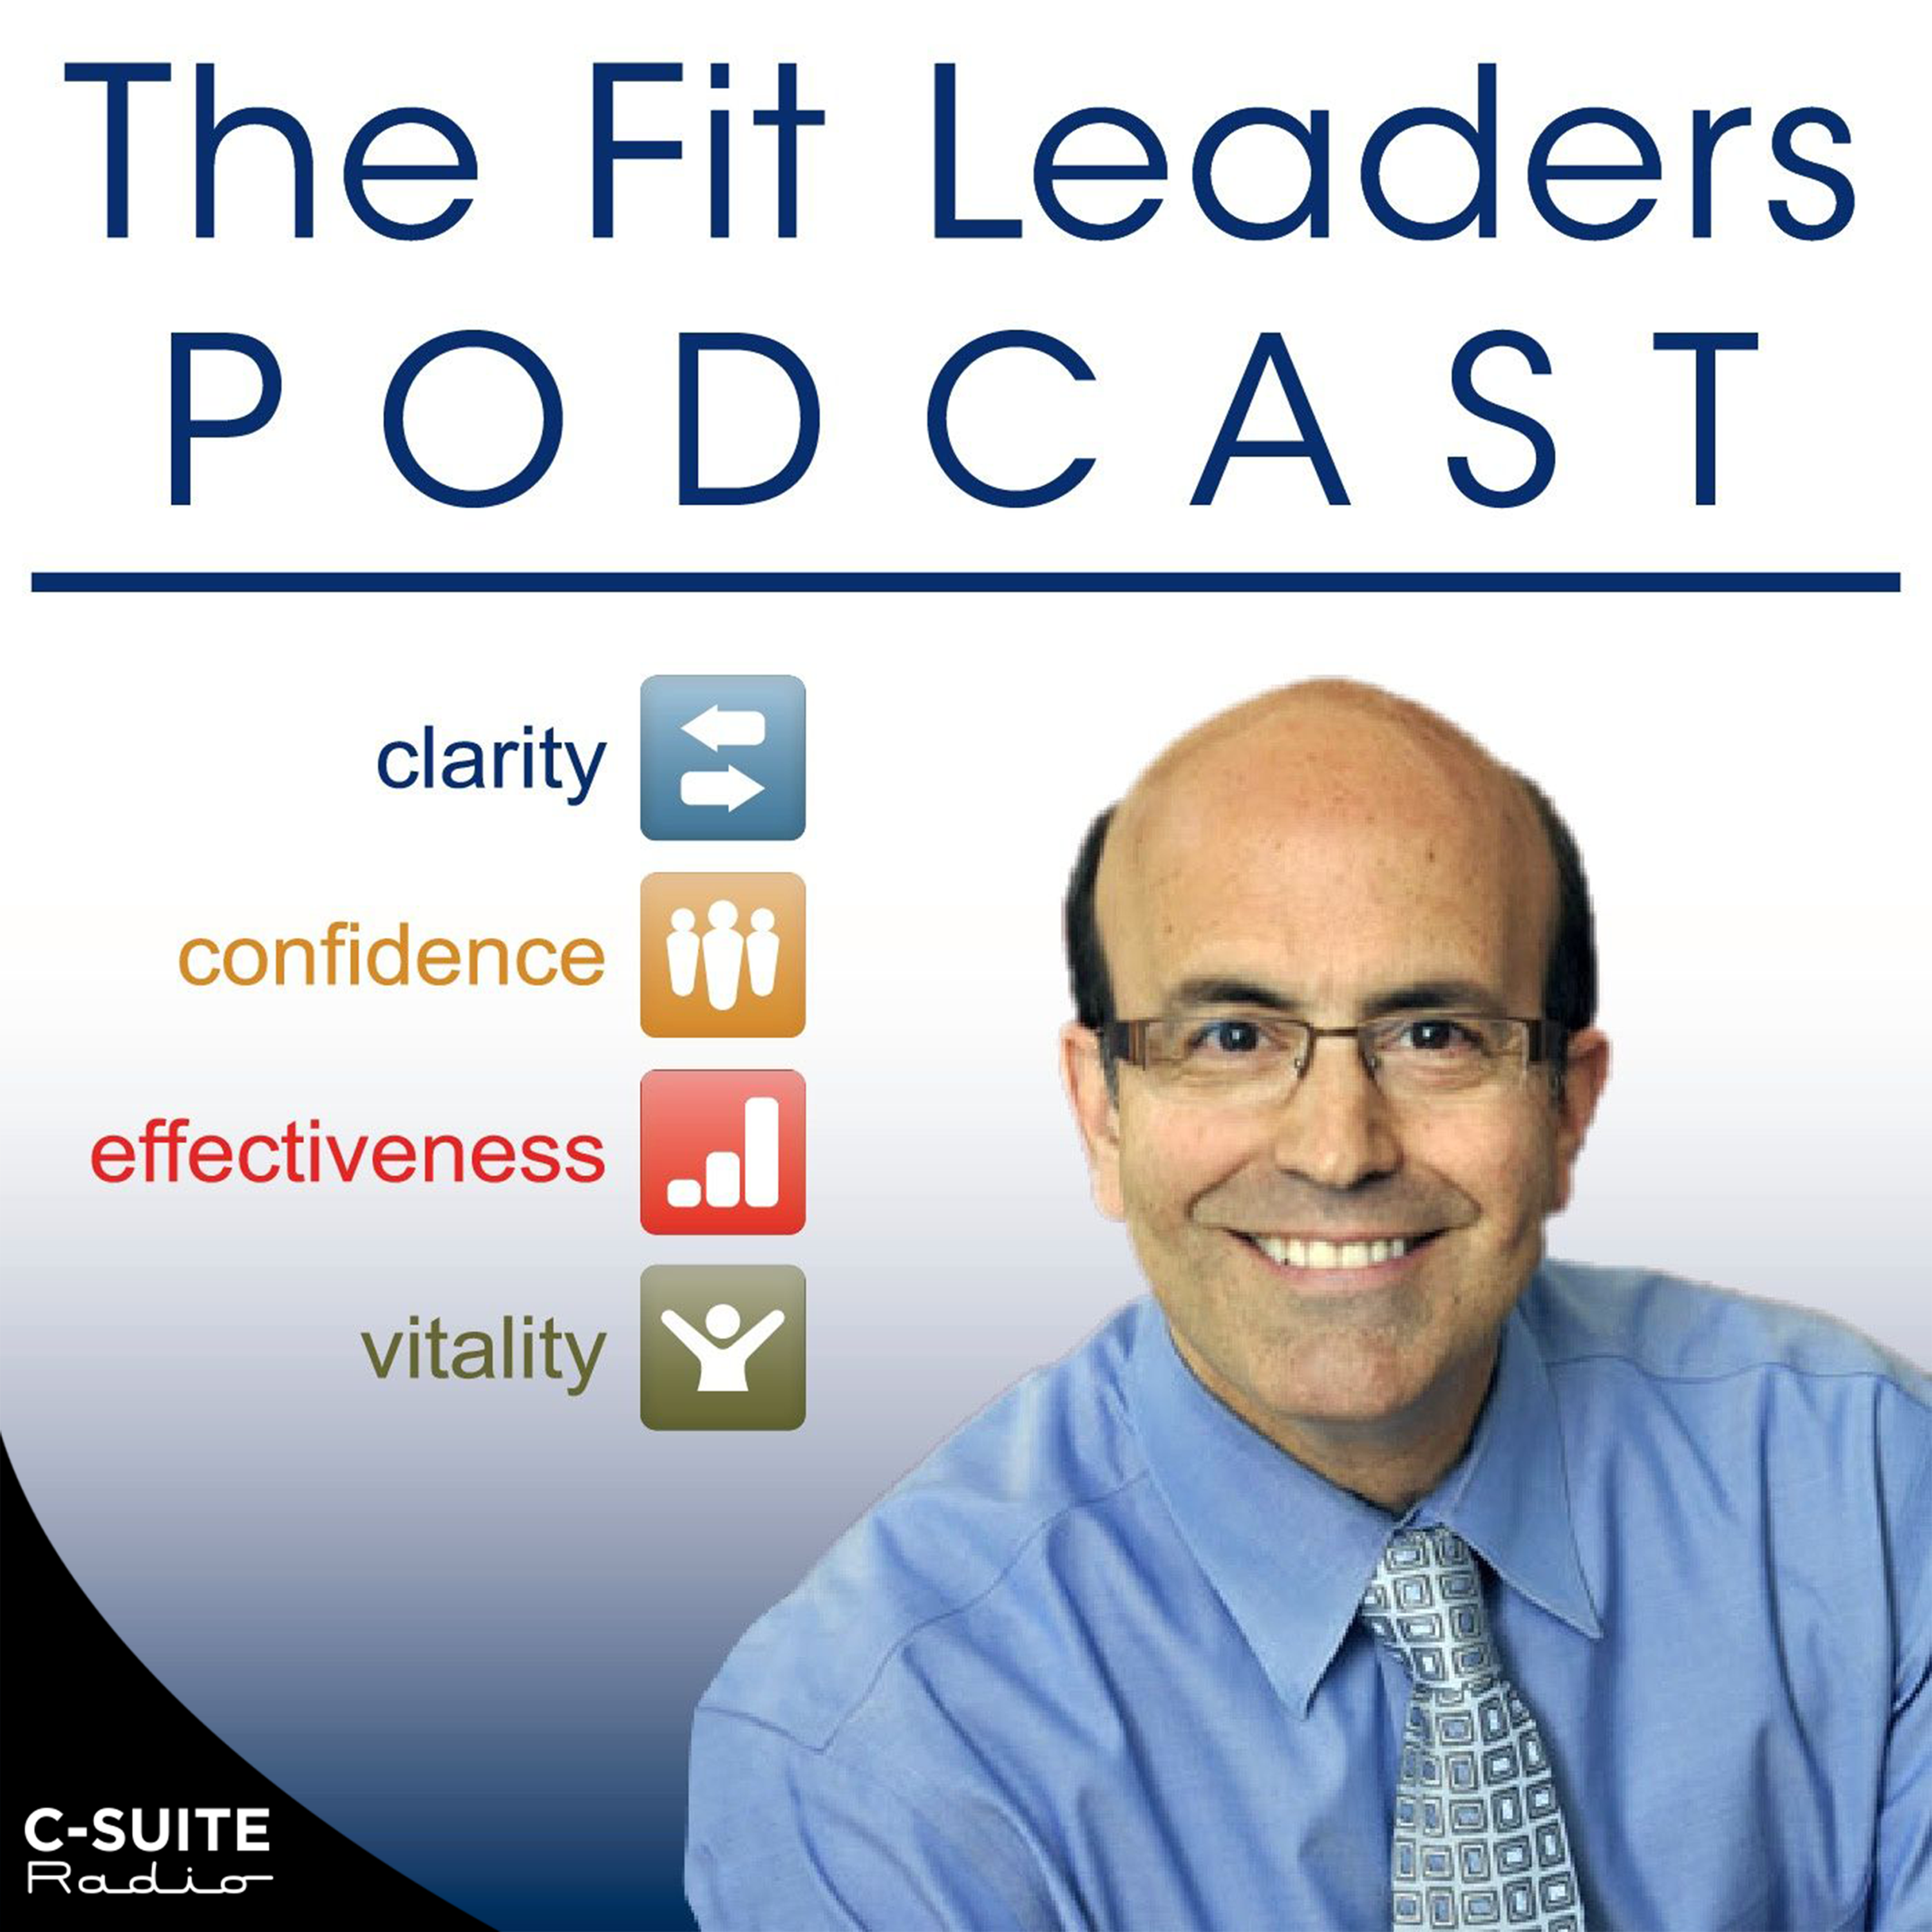 The Fit Leaders Podcast